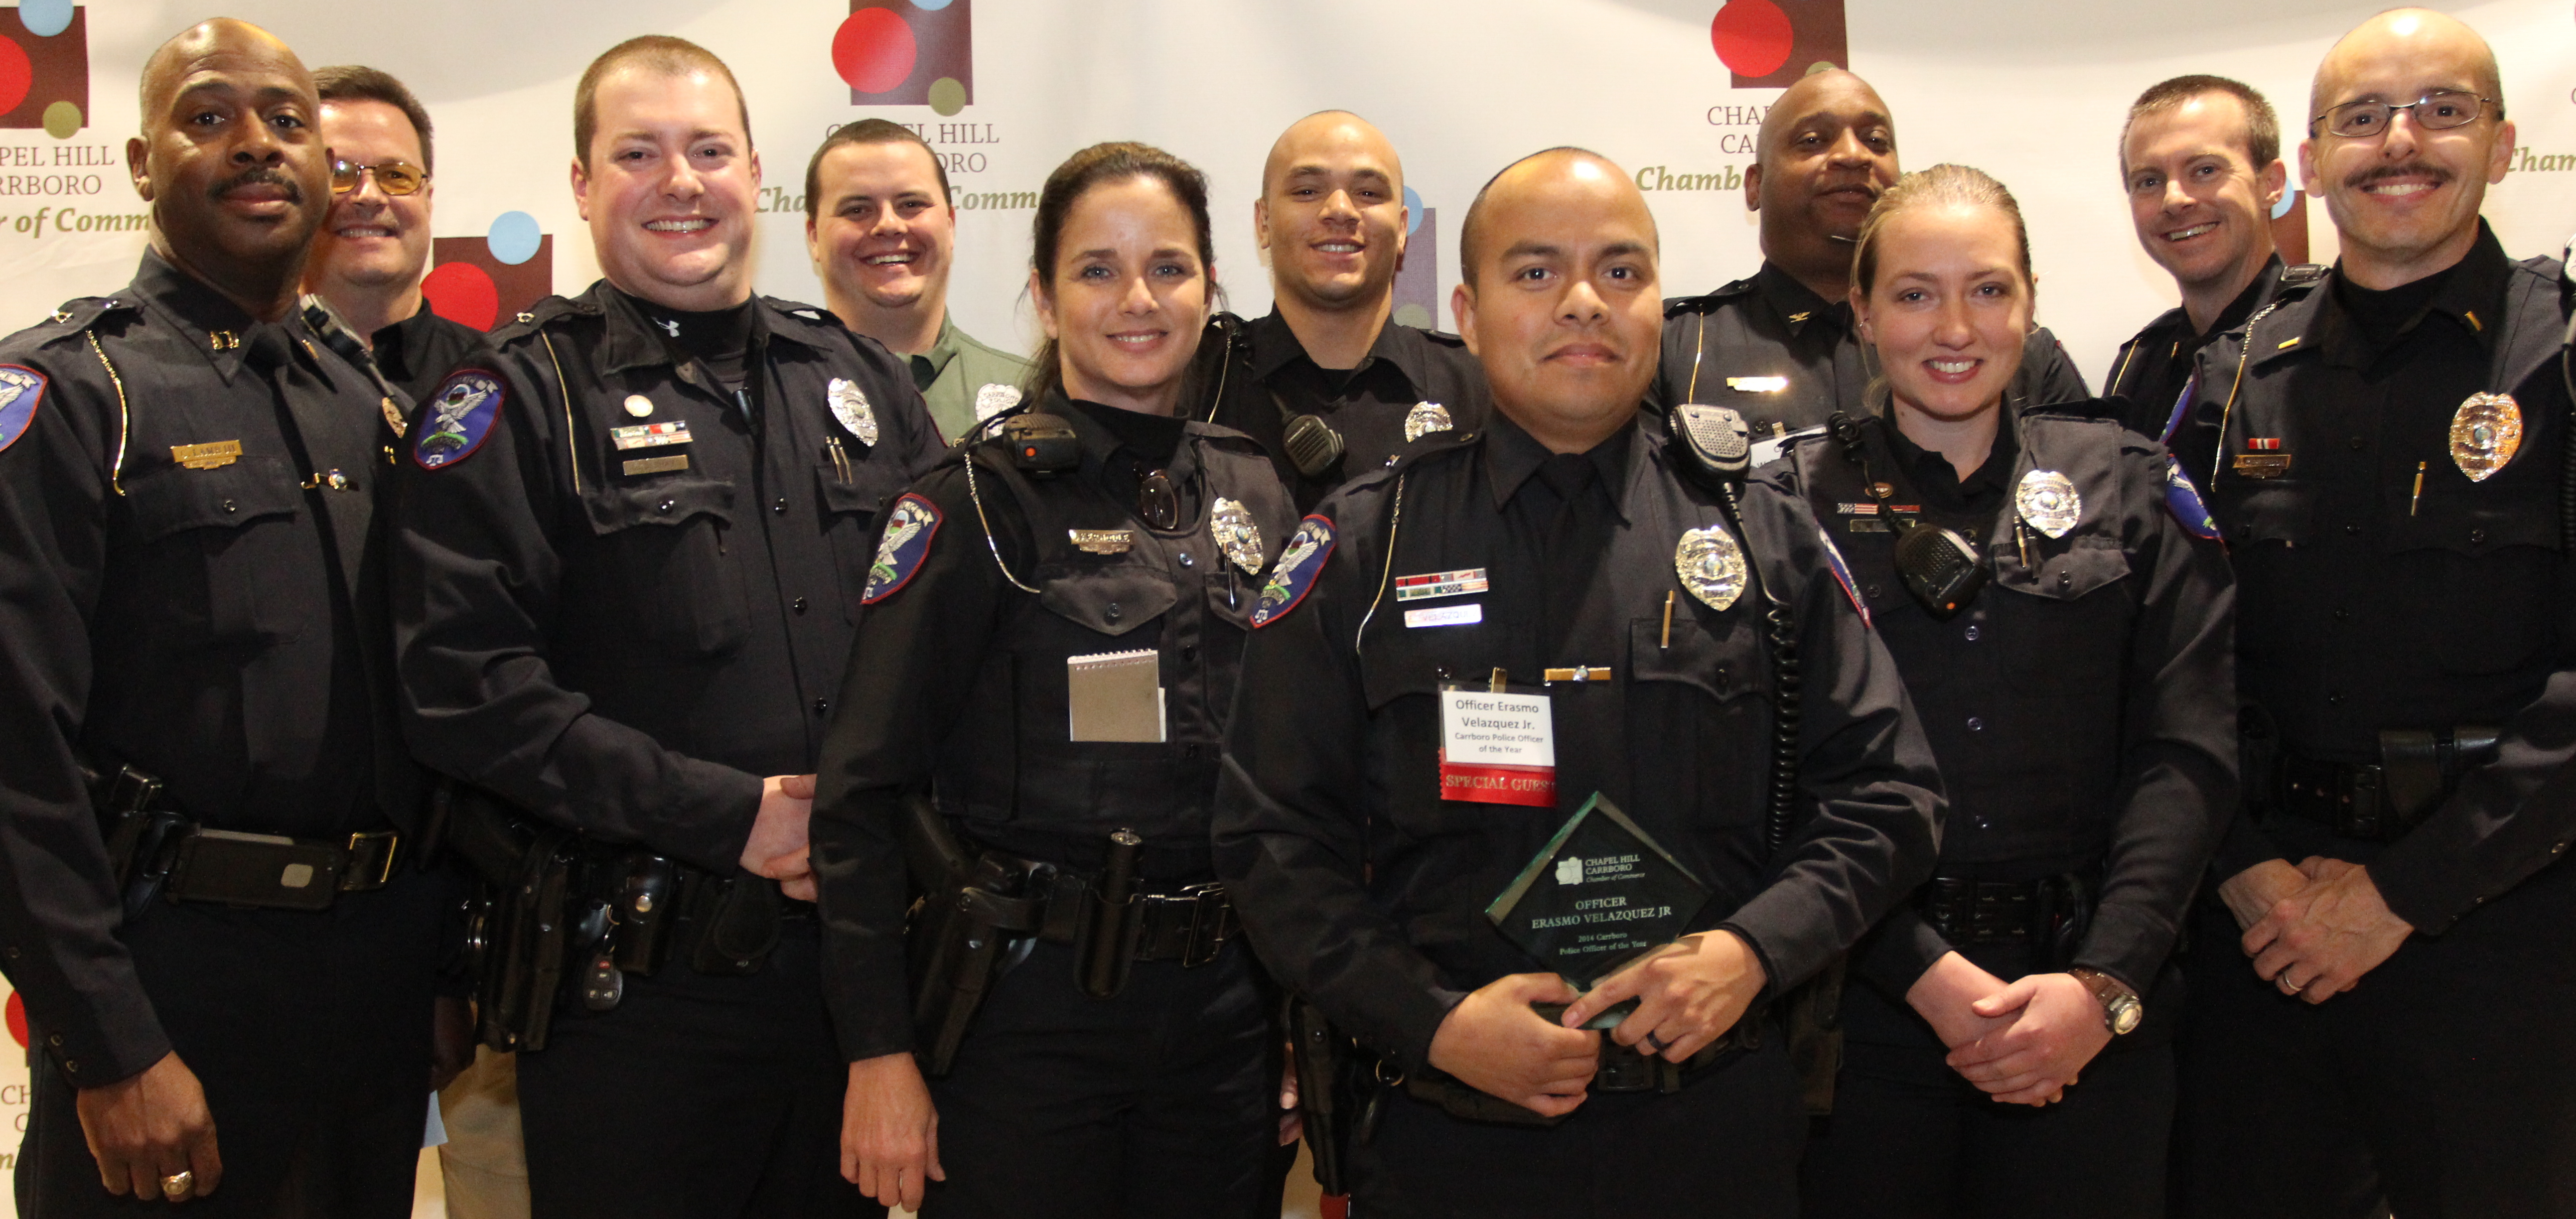 group of police officers smiling at camera in uniform